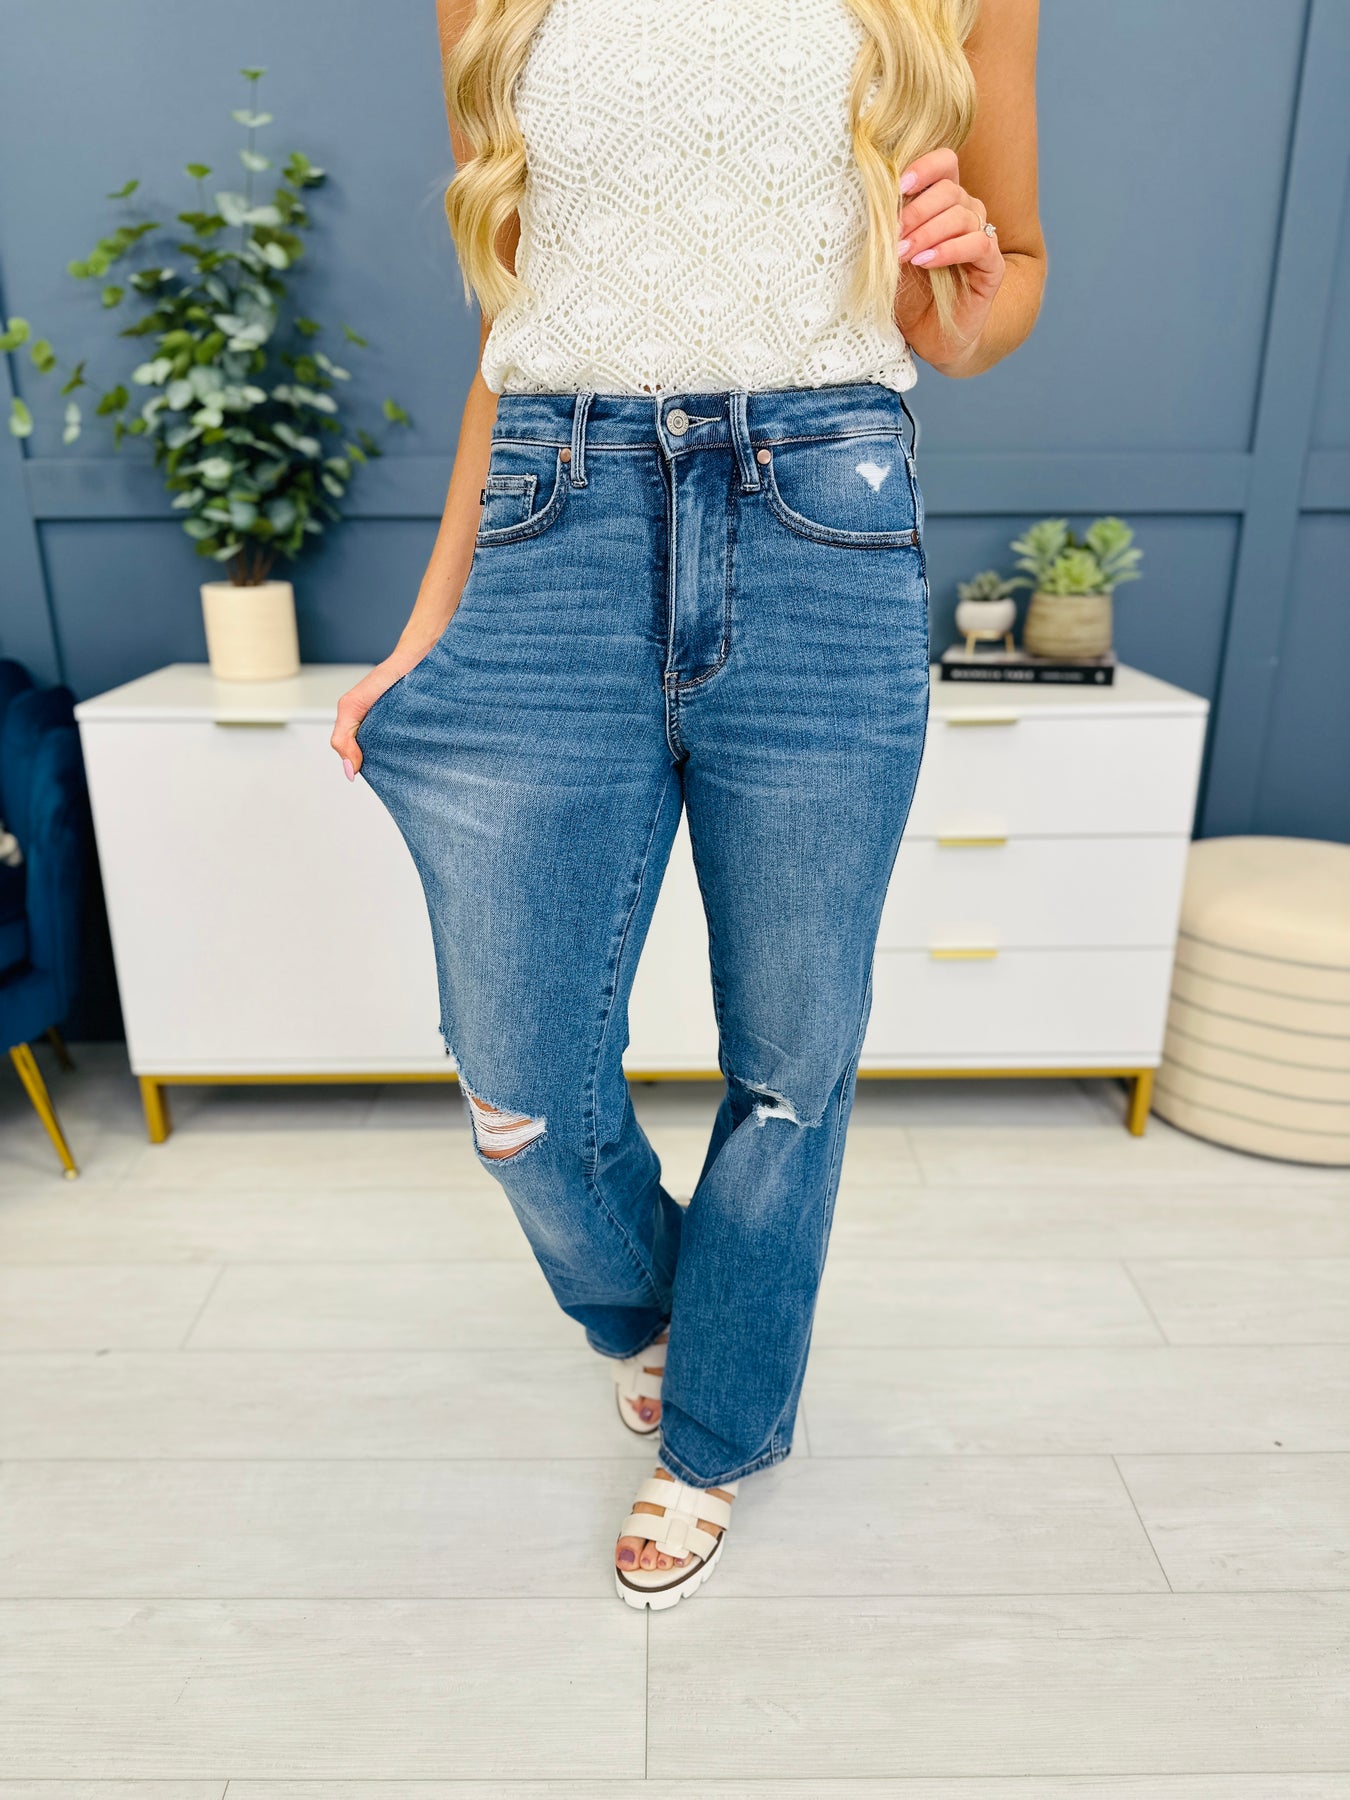 New Judy Blue spring Tummy Control Jeans are here! 👏 #shopmoco